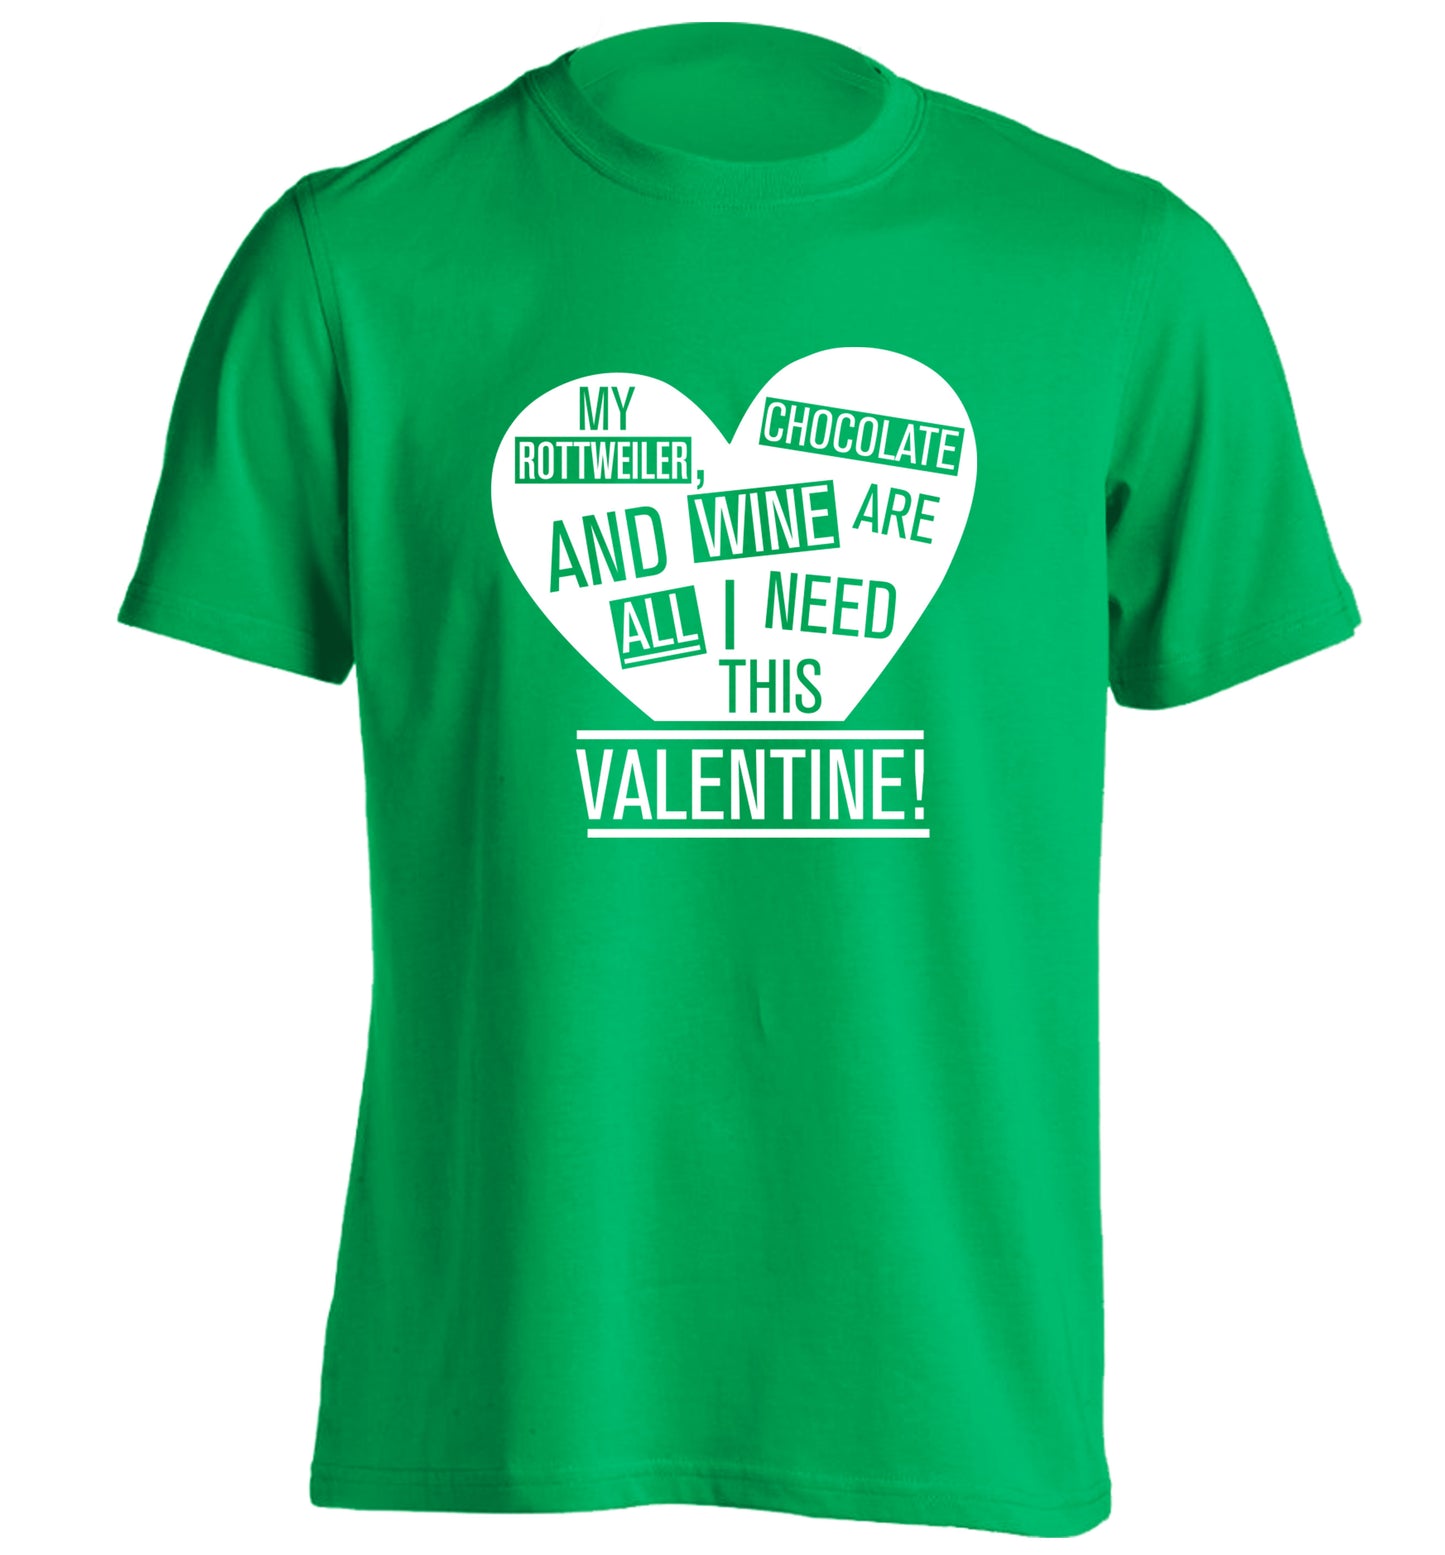 My rottweiler, chocolate and wine are all I need this valentine! adults unisex green Tshirt 2XL